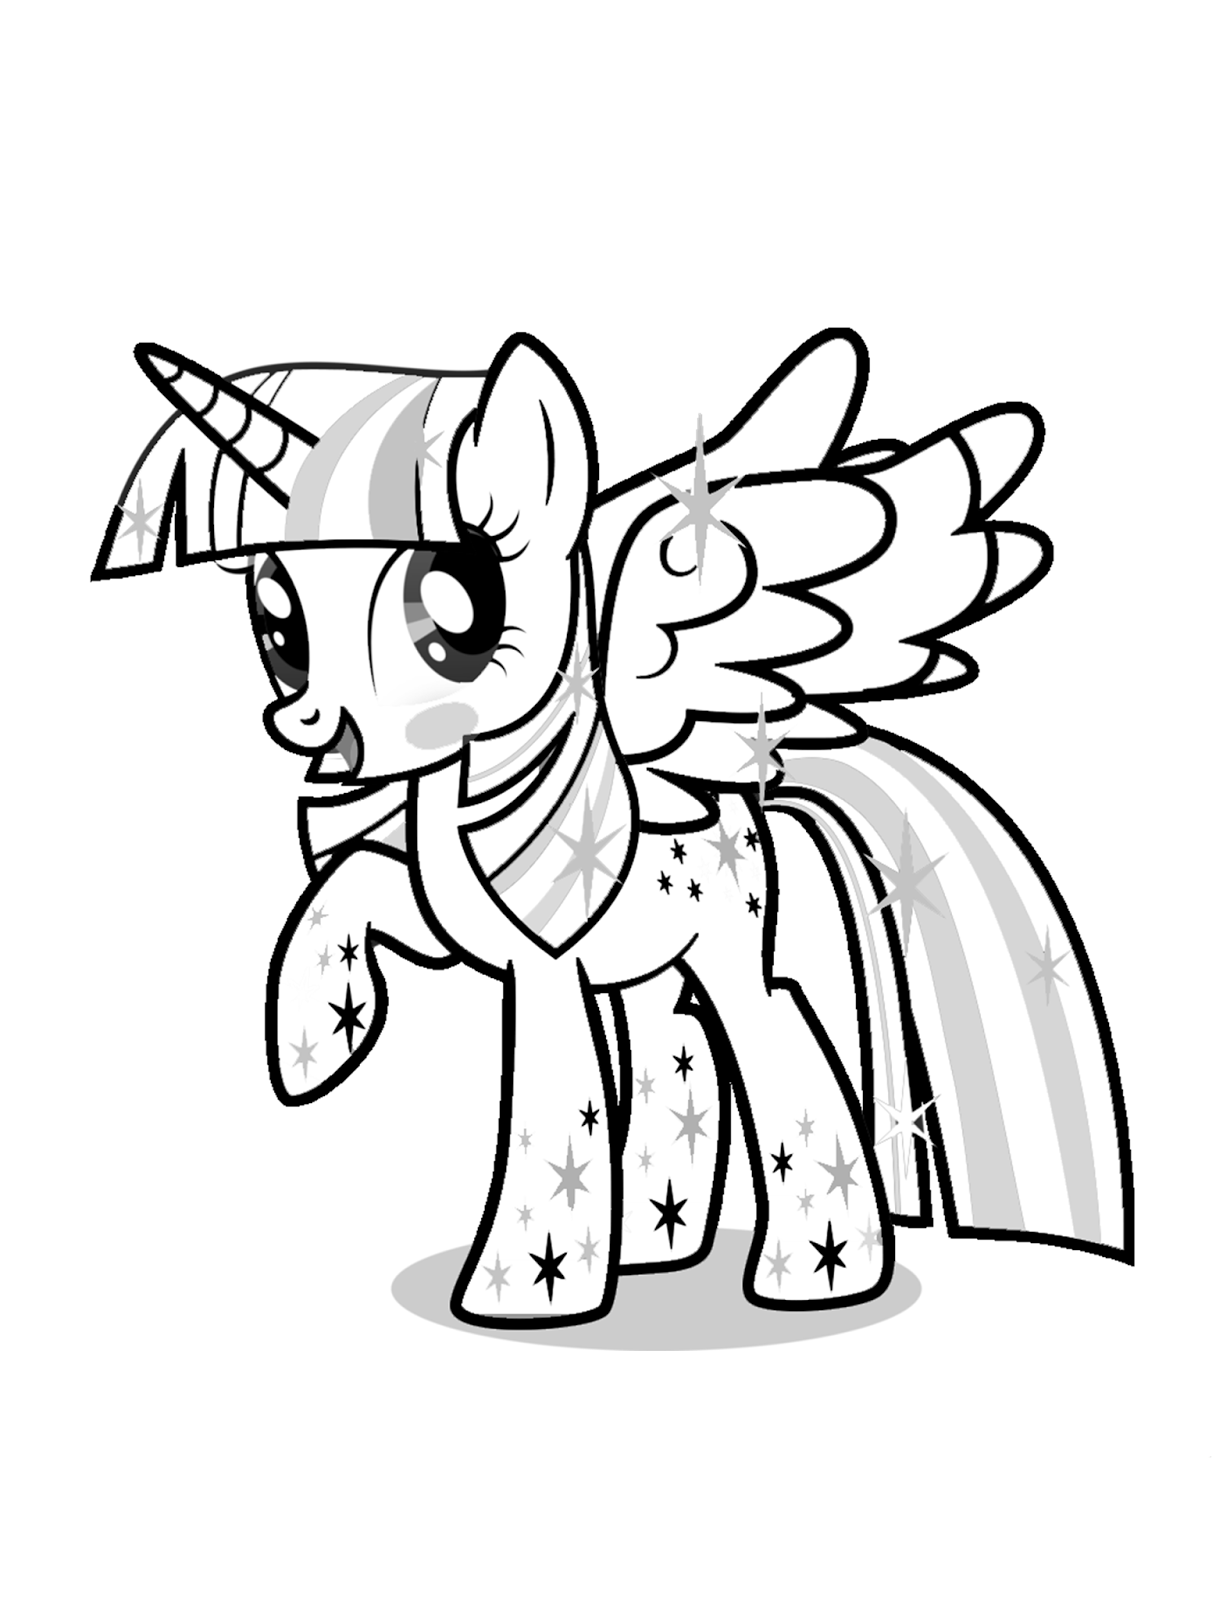 Twilight sparkle coloring pages